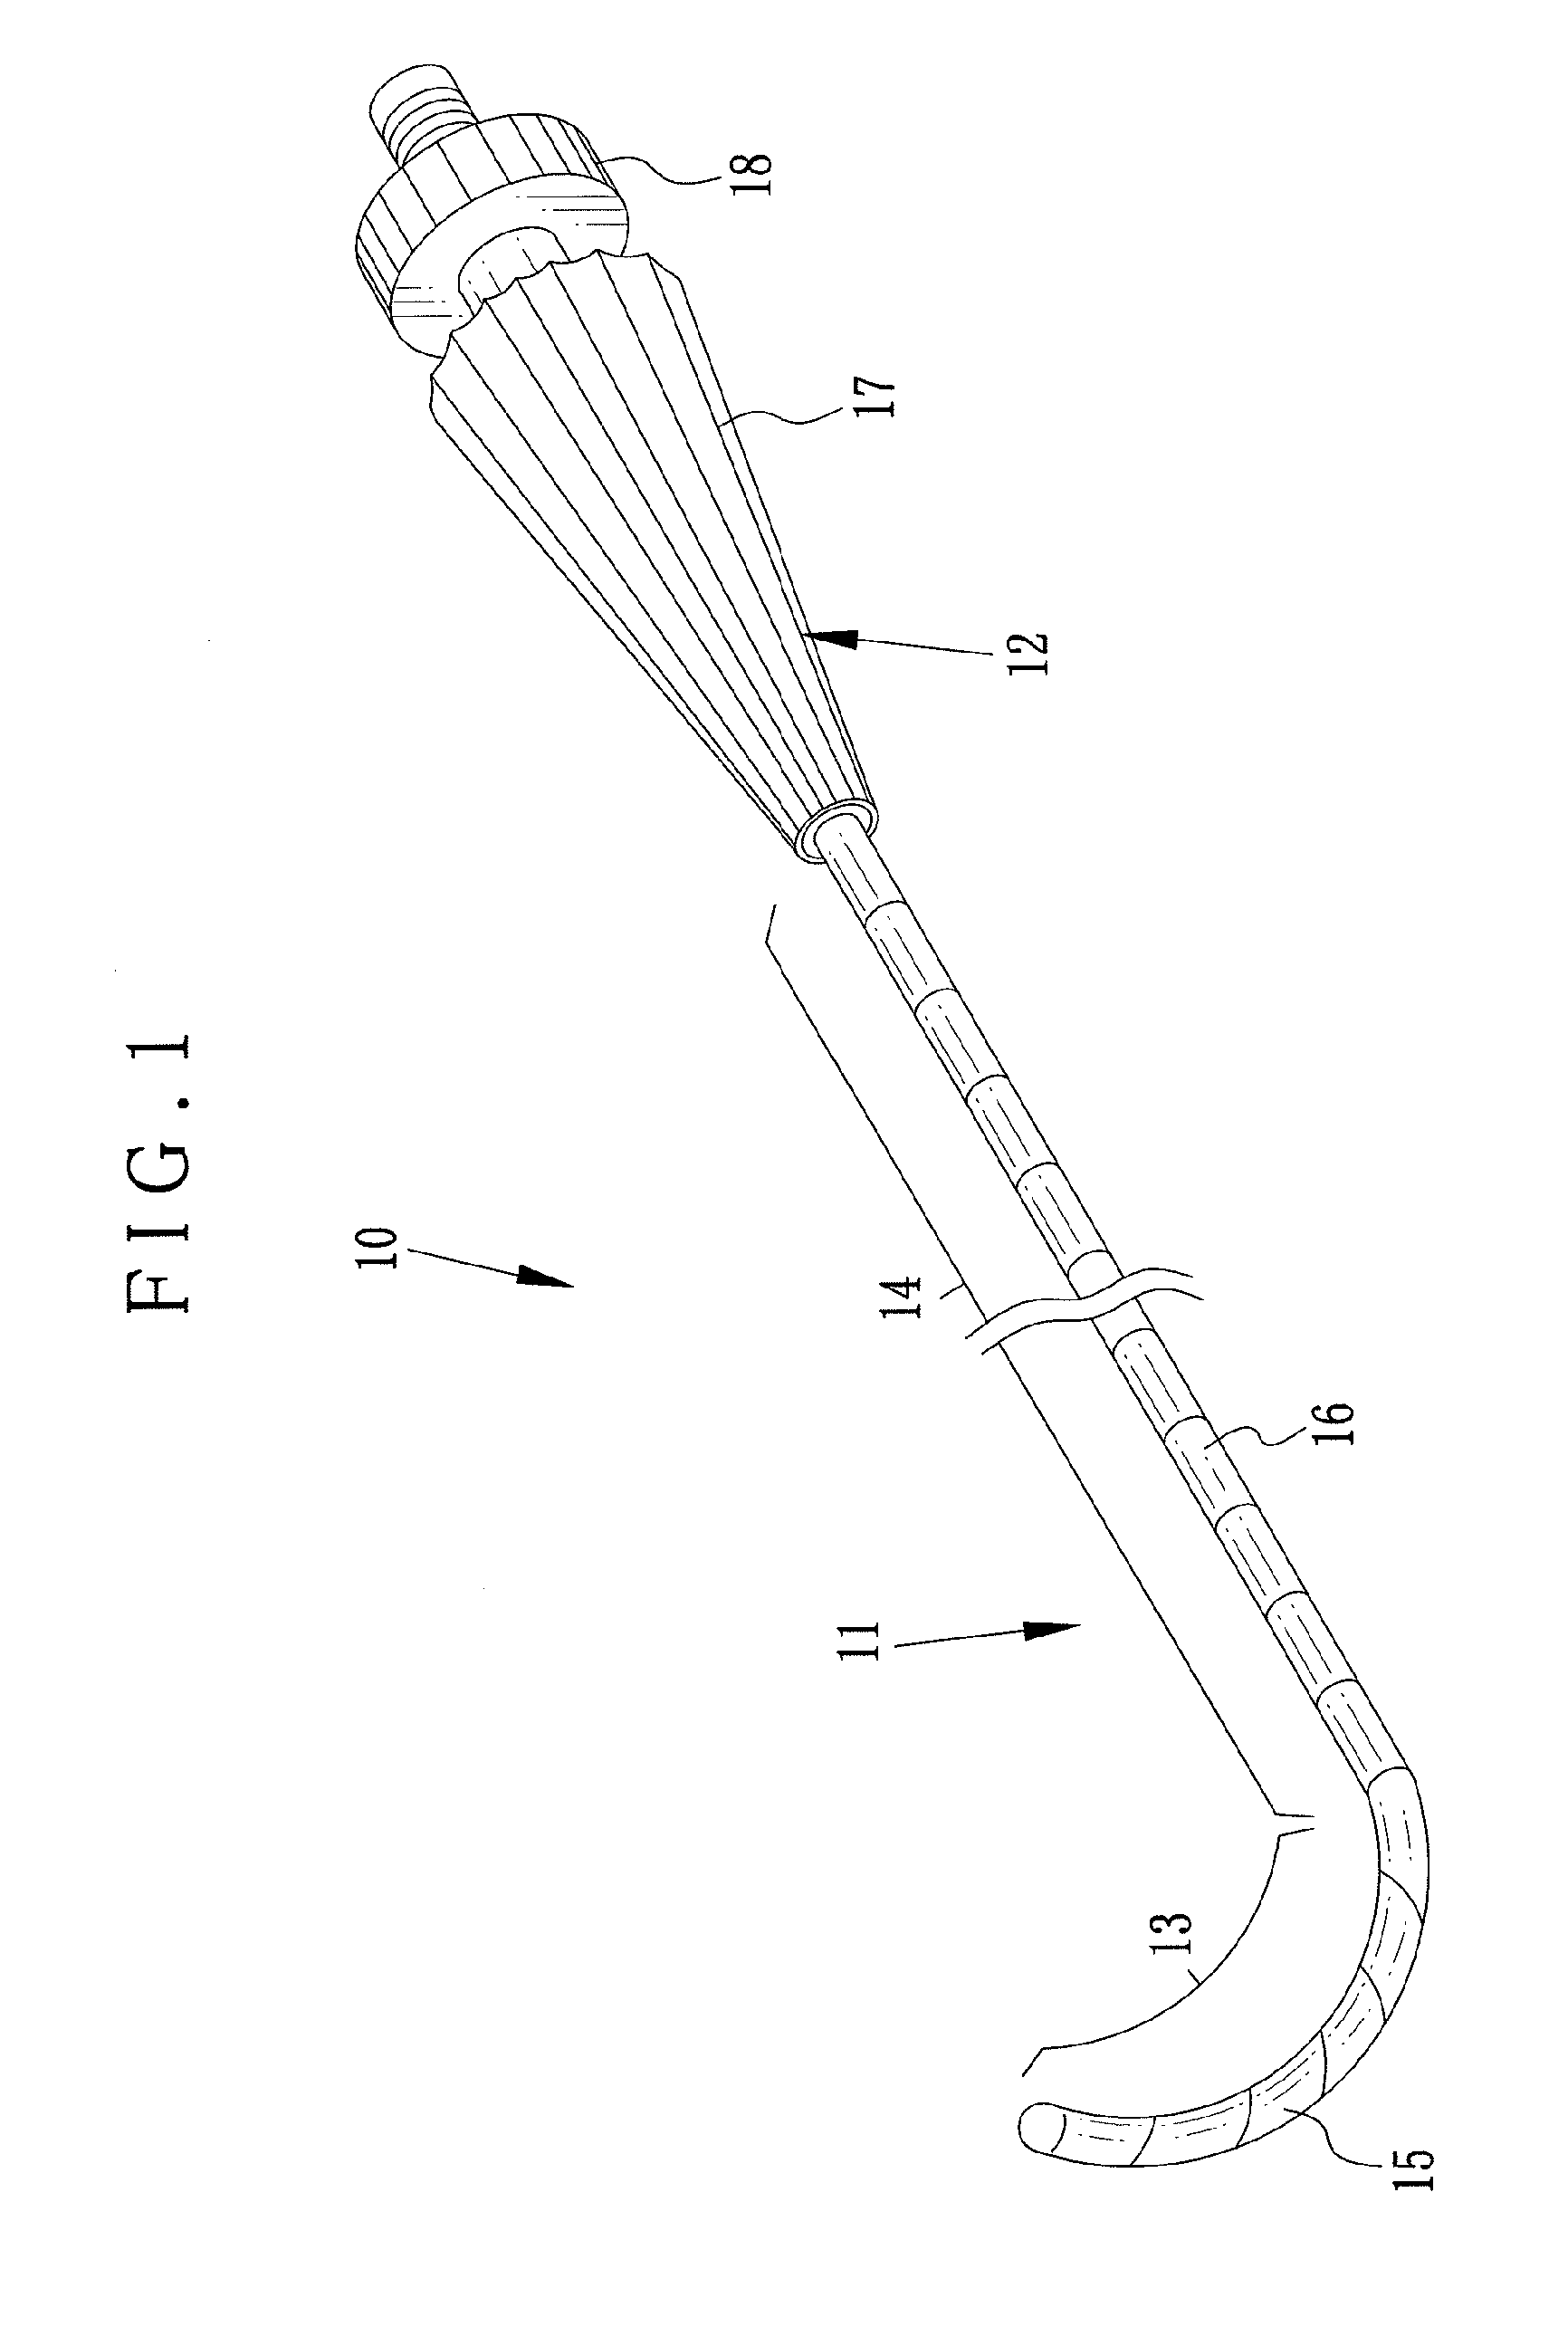 Torque transmission device having control wire